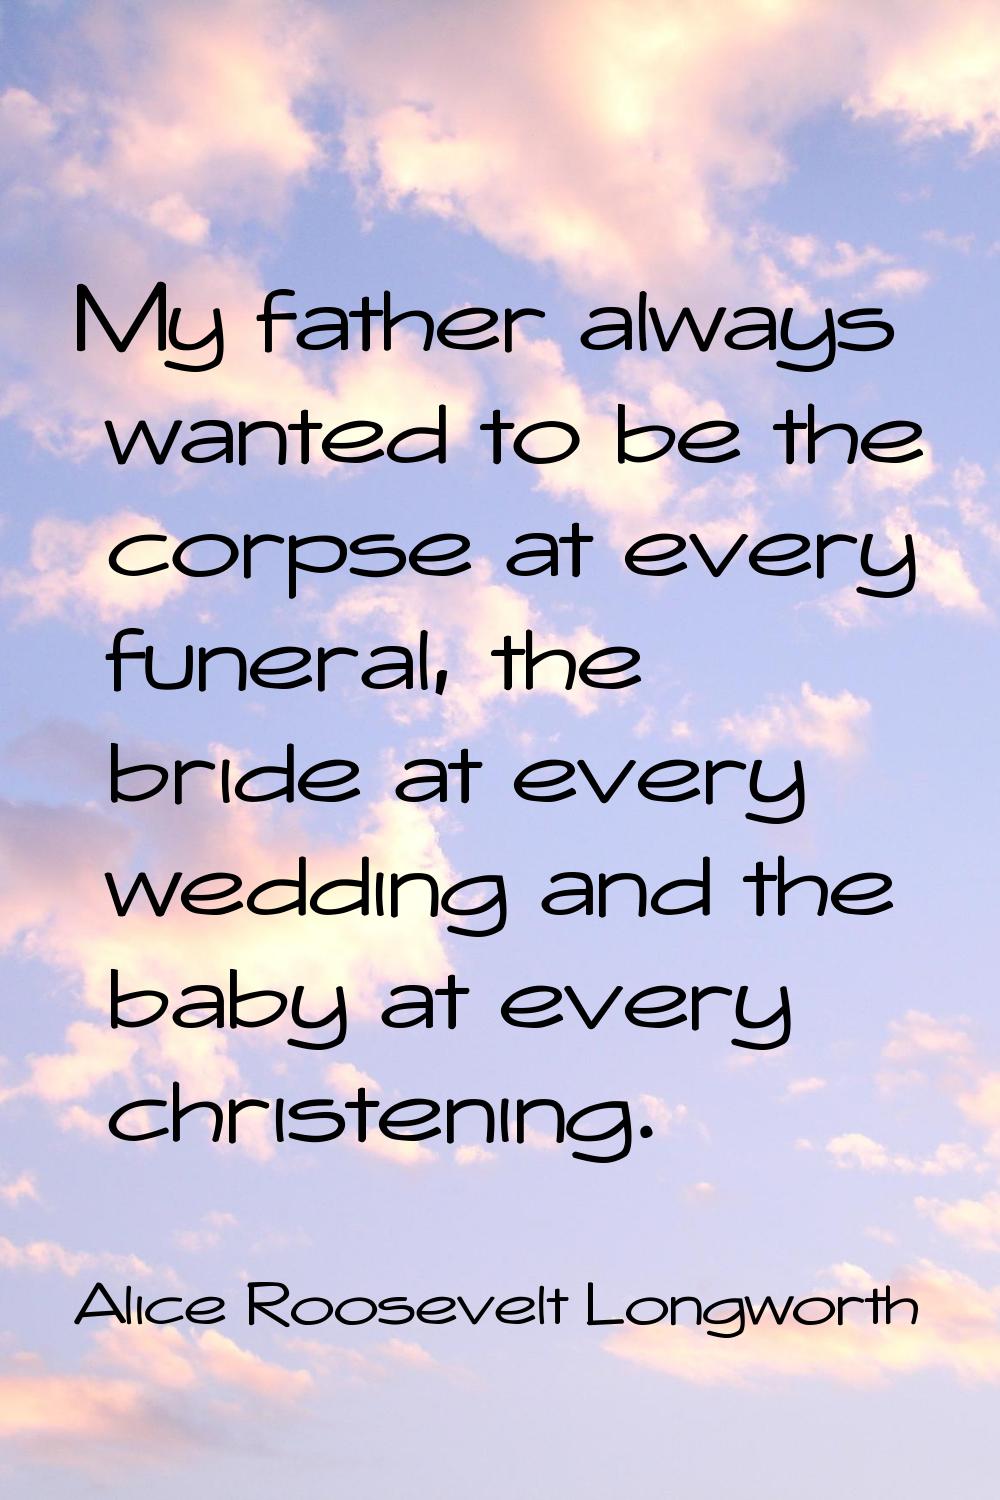 My father always wanted to be the corpse at every funeral, the bride at every wedding and the baby 